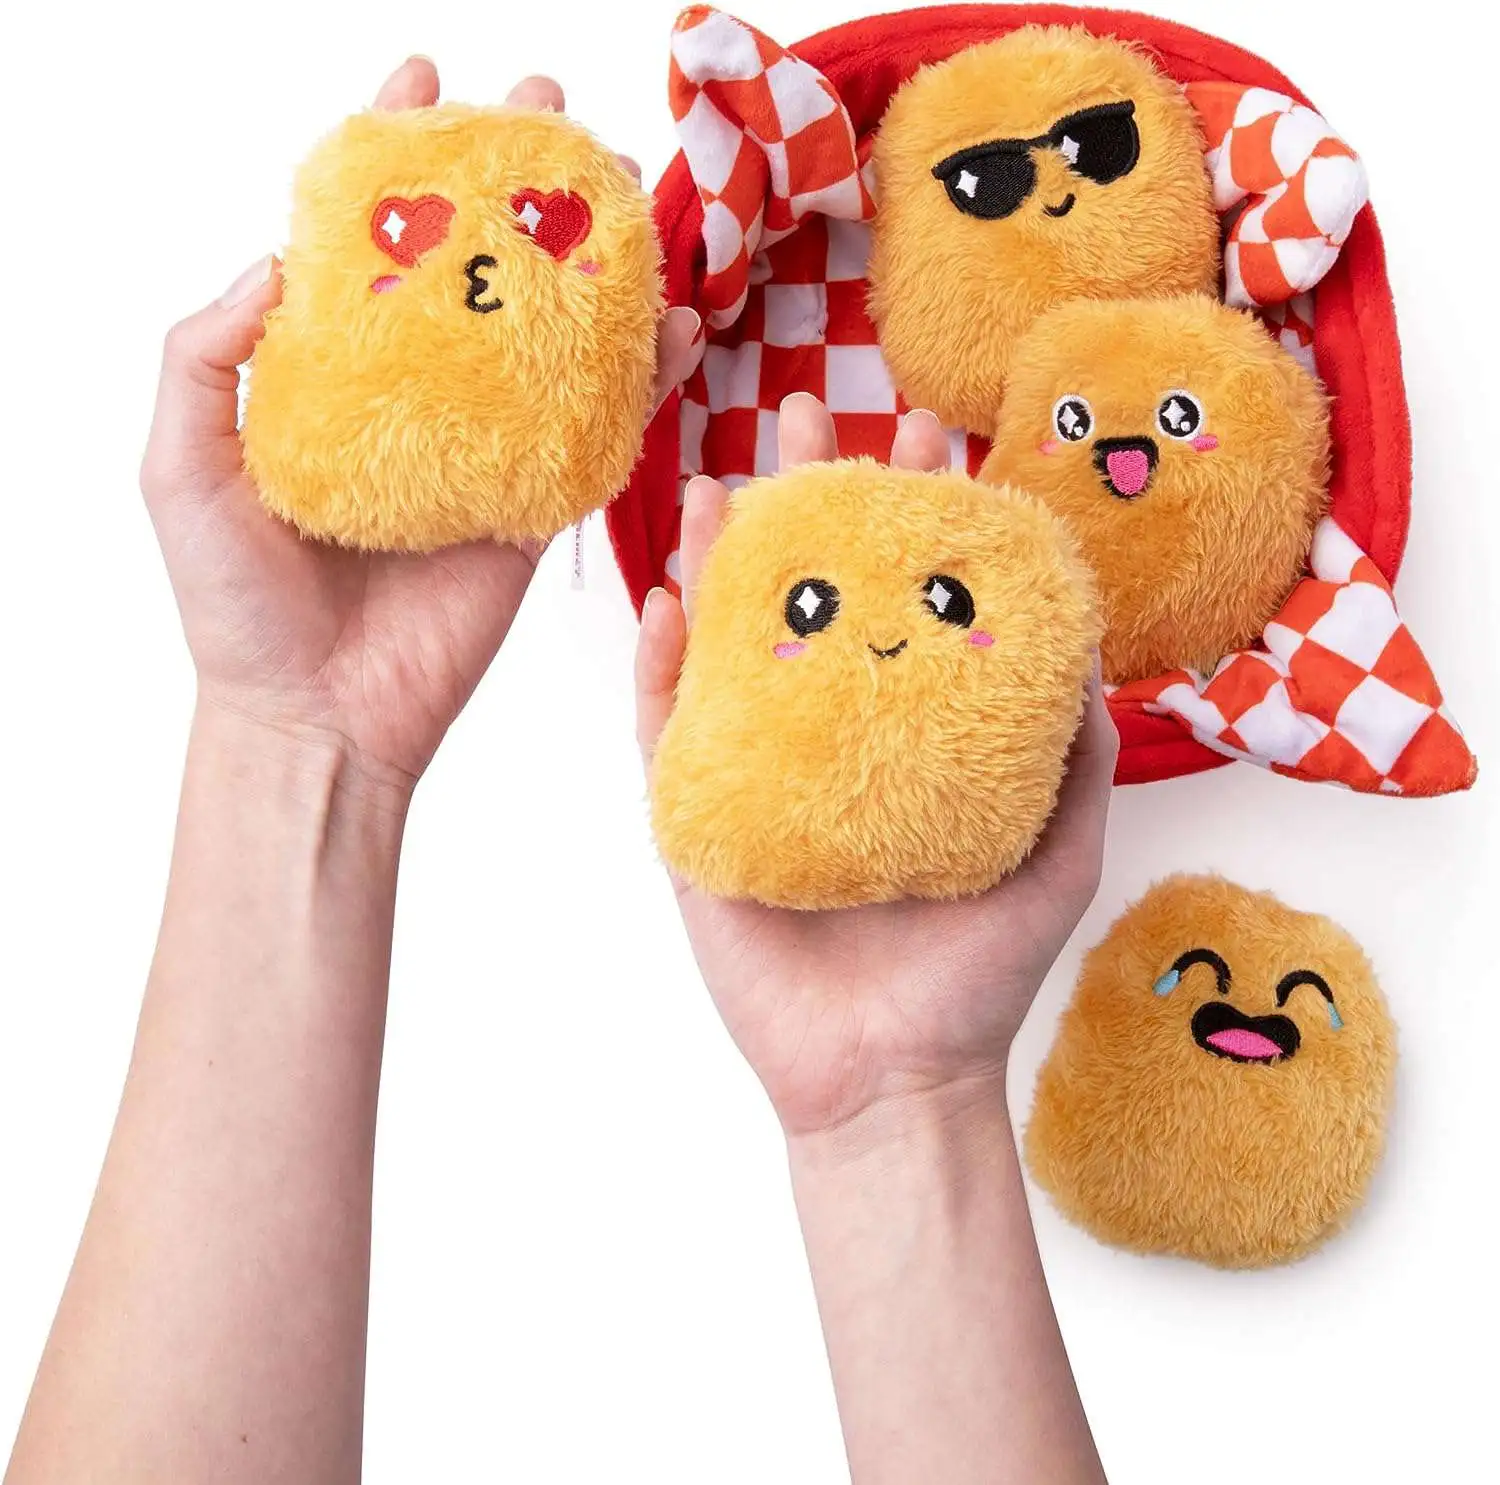 Emotional Support Chicken Nuggets Squishy Plush Nuggets by What Do You Meme  NEW